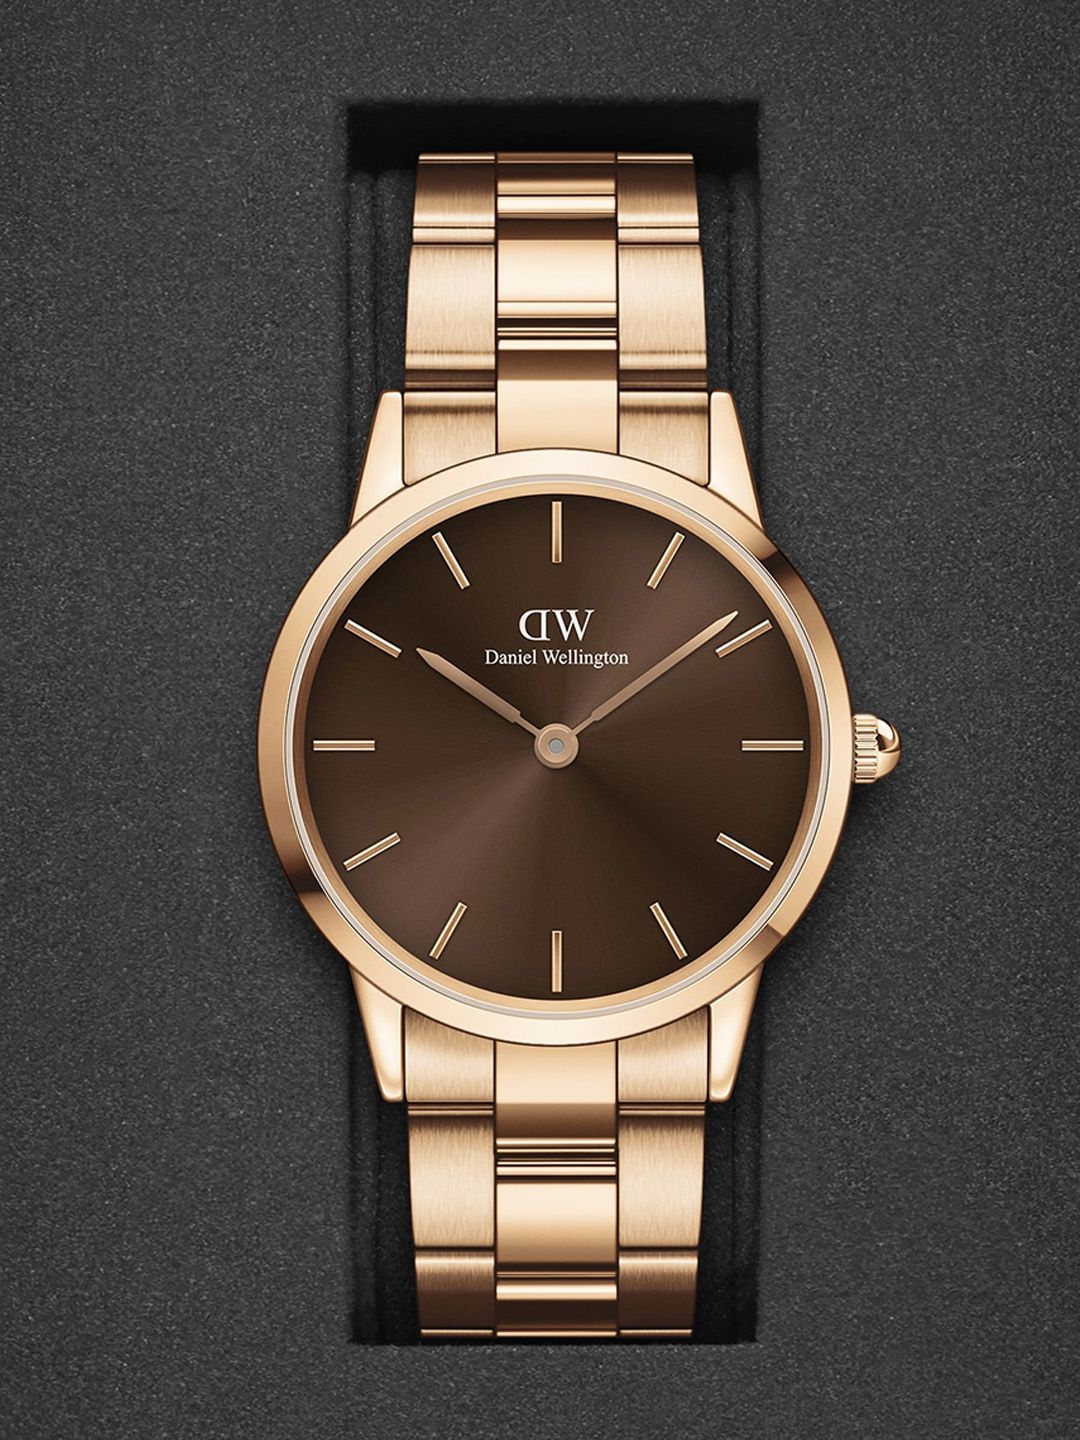 Daniel Wellington Unisex Brown Dial & Rose Gold-Plated Analogue Watch DW00100461 Price in India